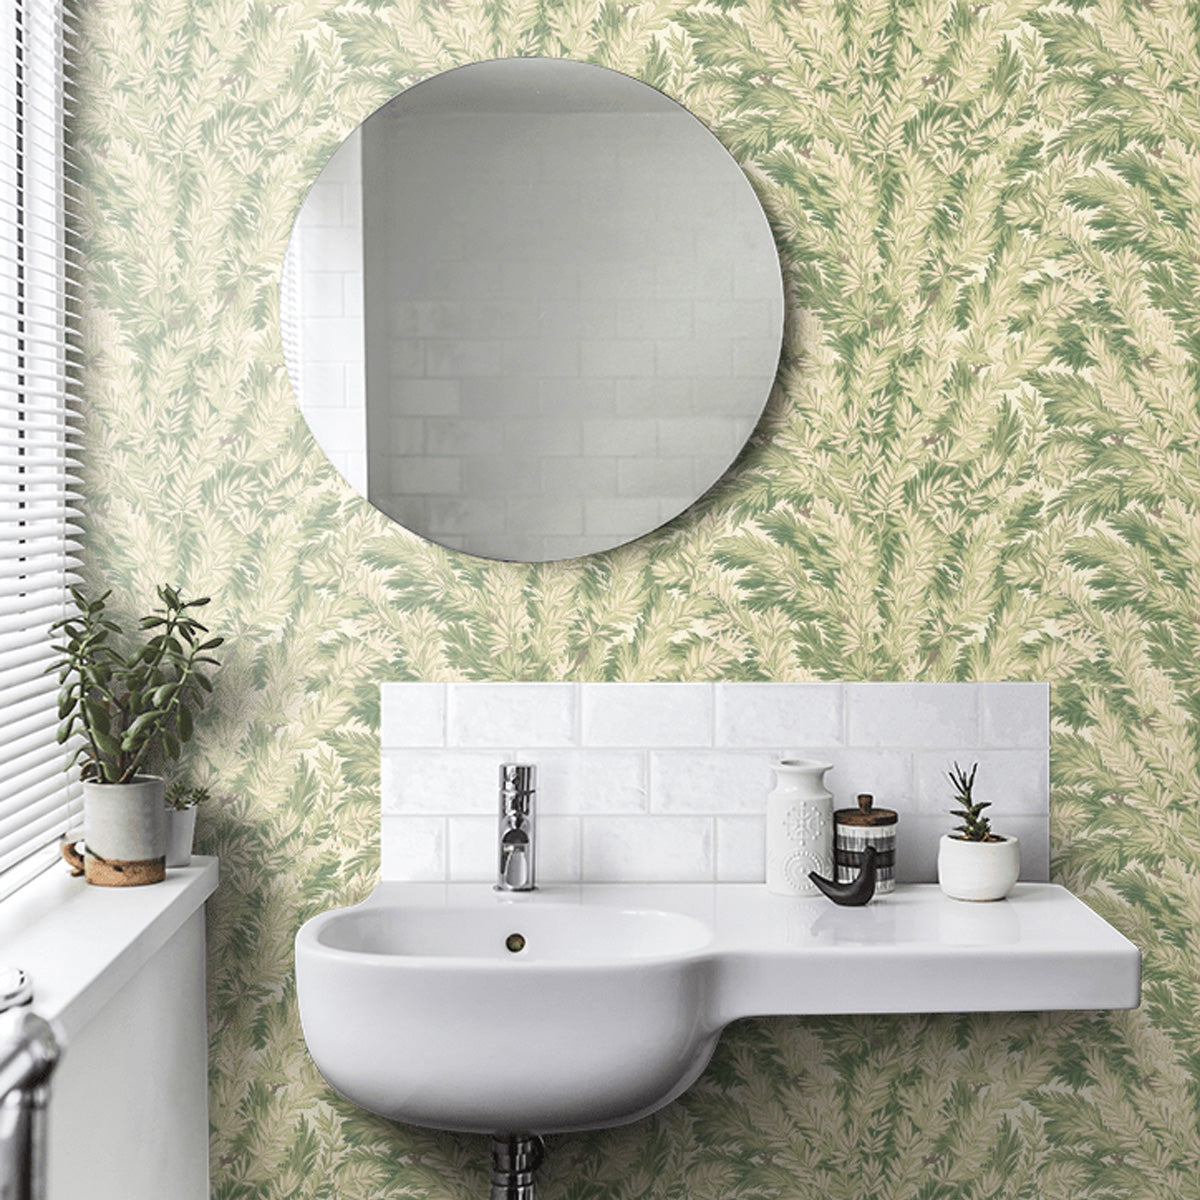 Cole &amp; Son &#39;Florencecourt Olive&#39; Wallpaper